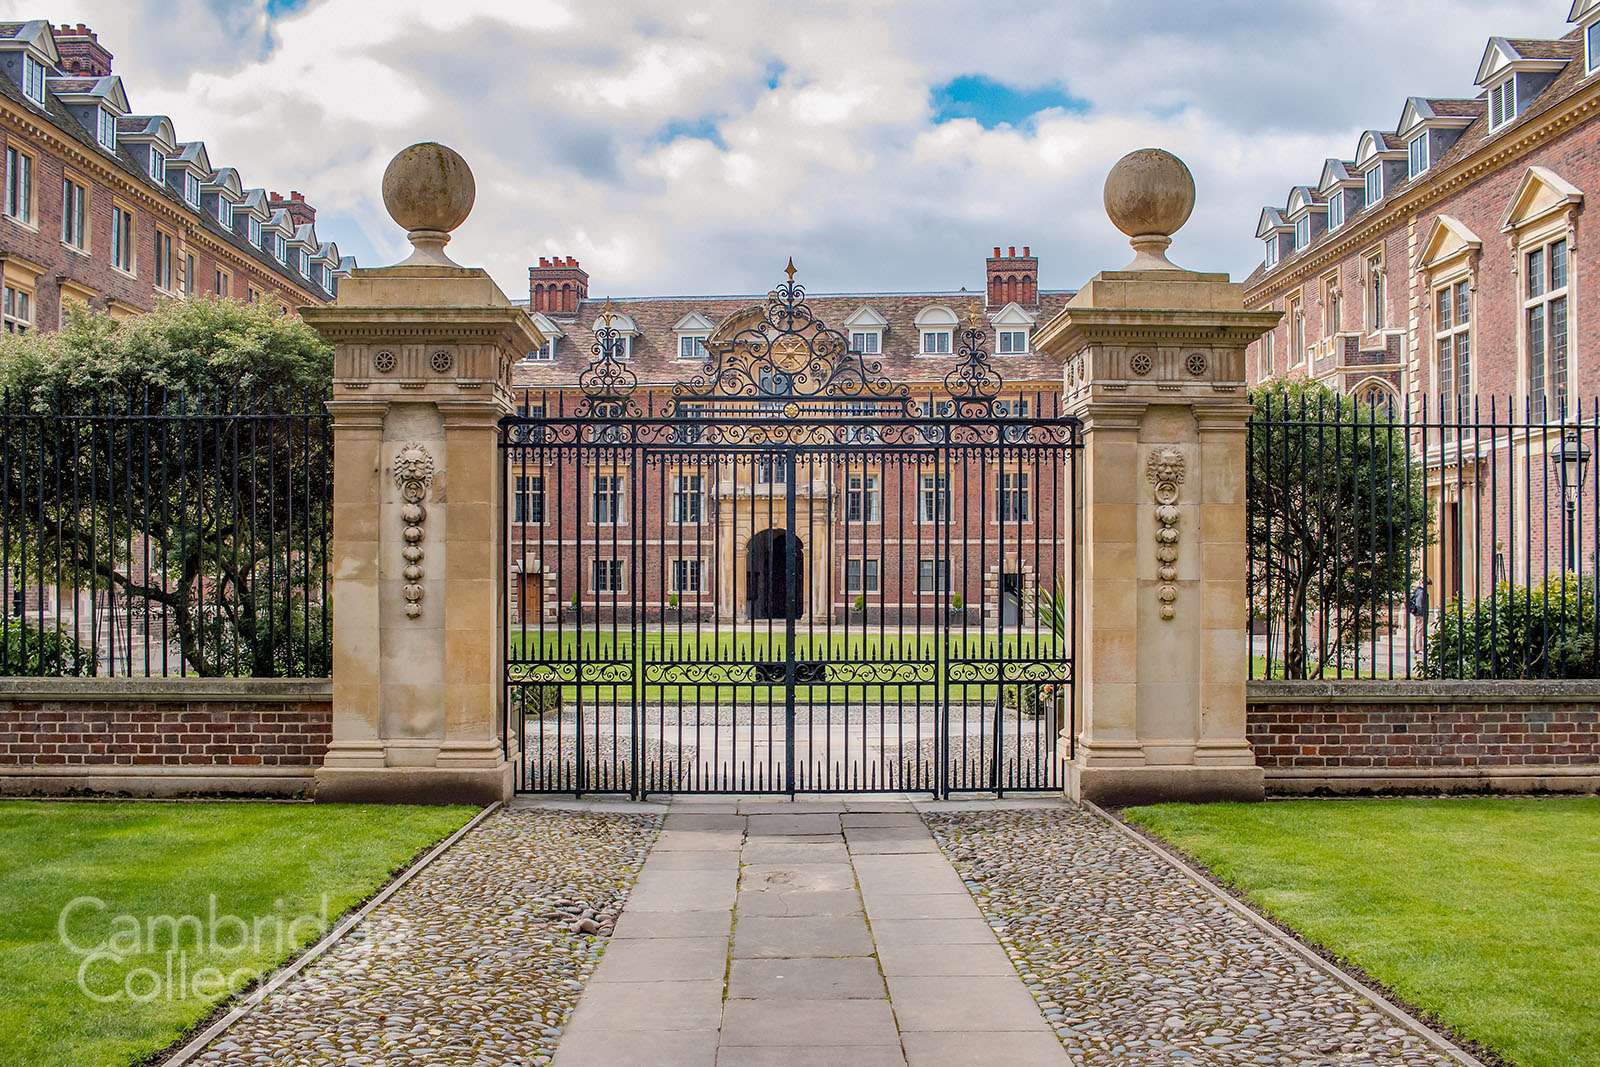 The gates of St Catharine's college